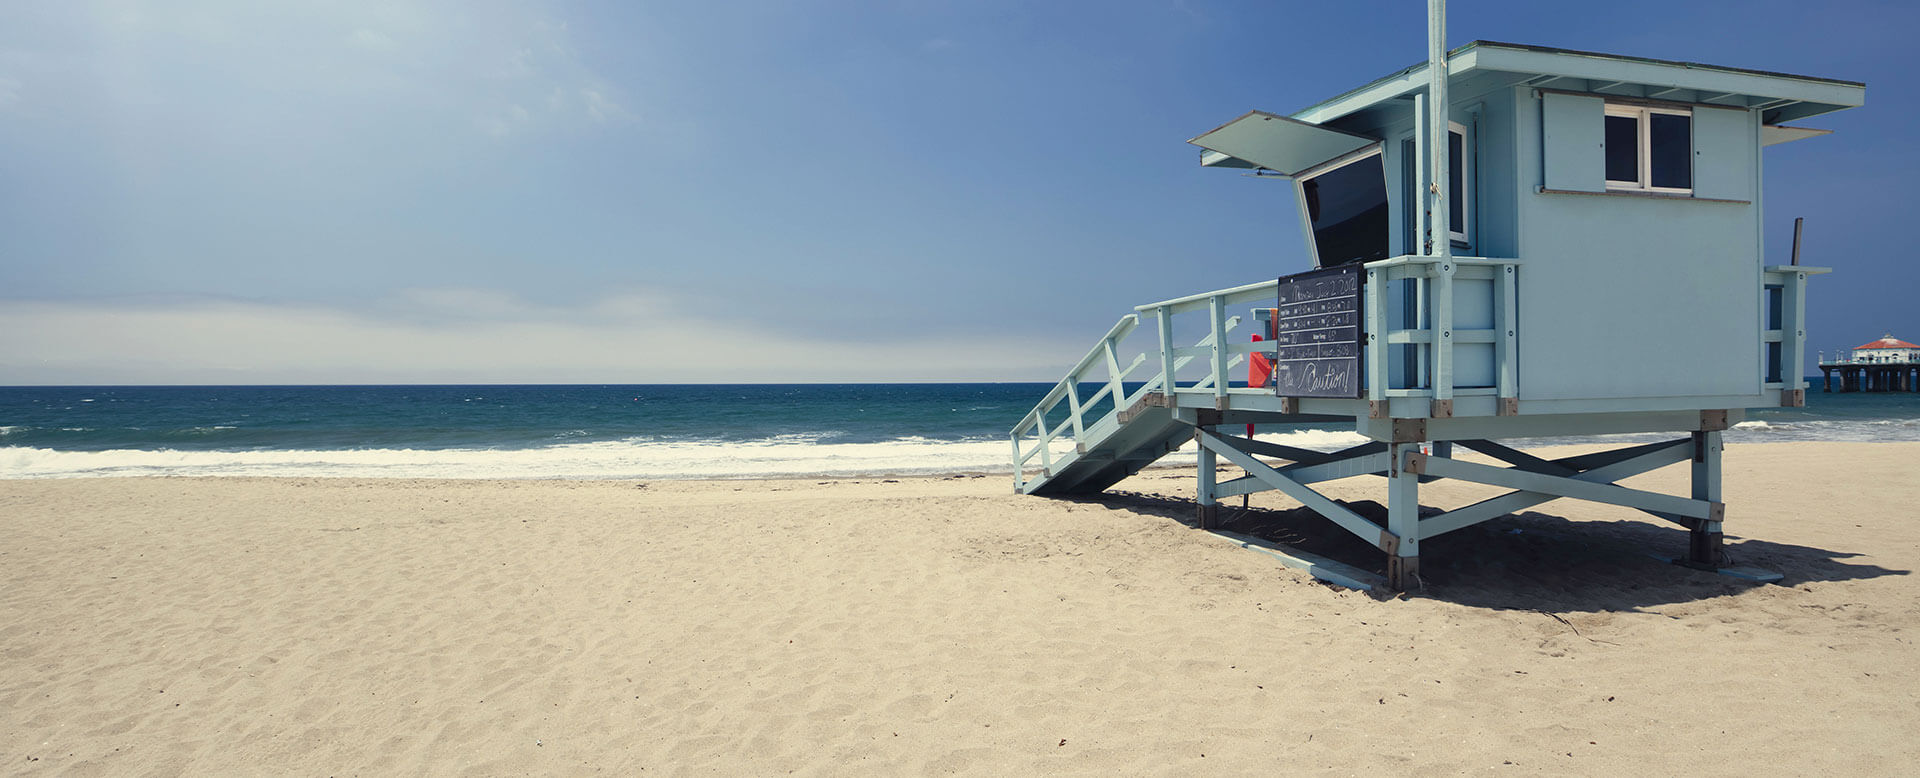 Los Angeles Lifeguard Tower